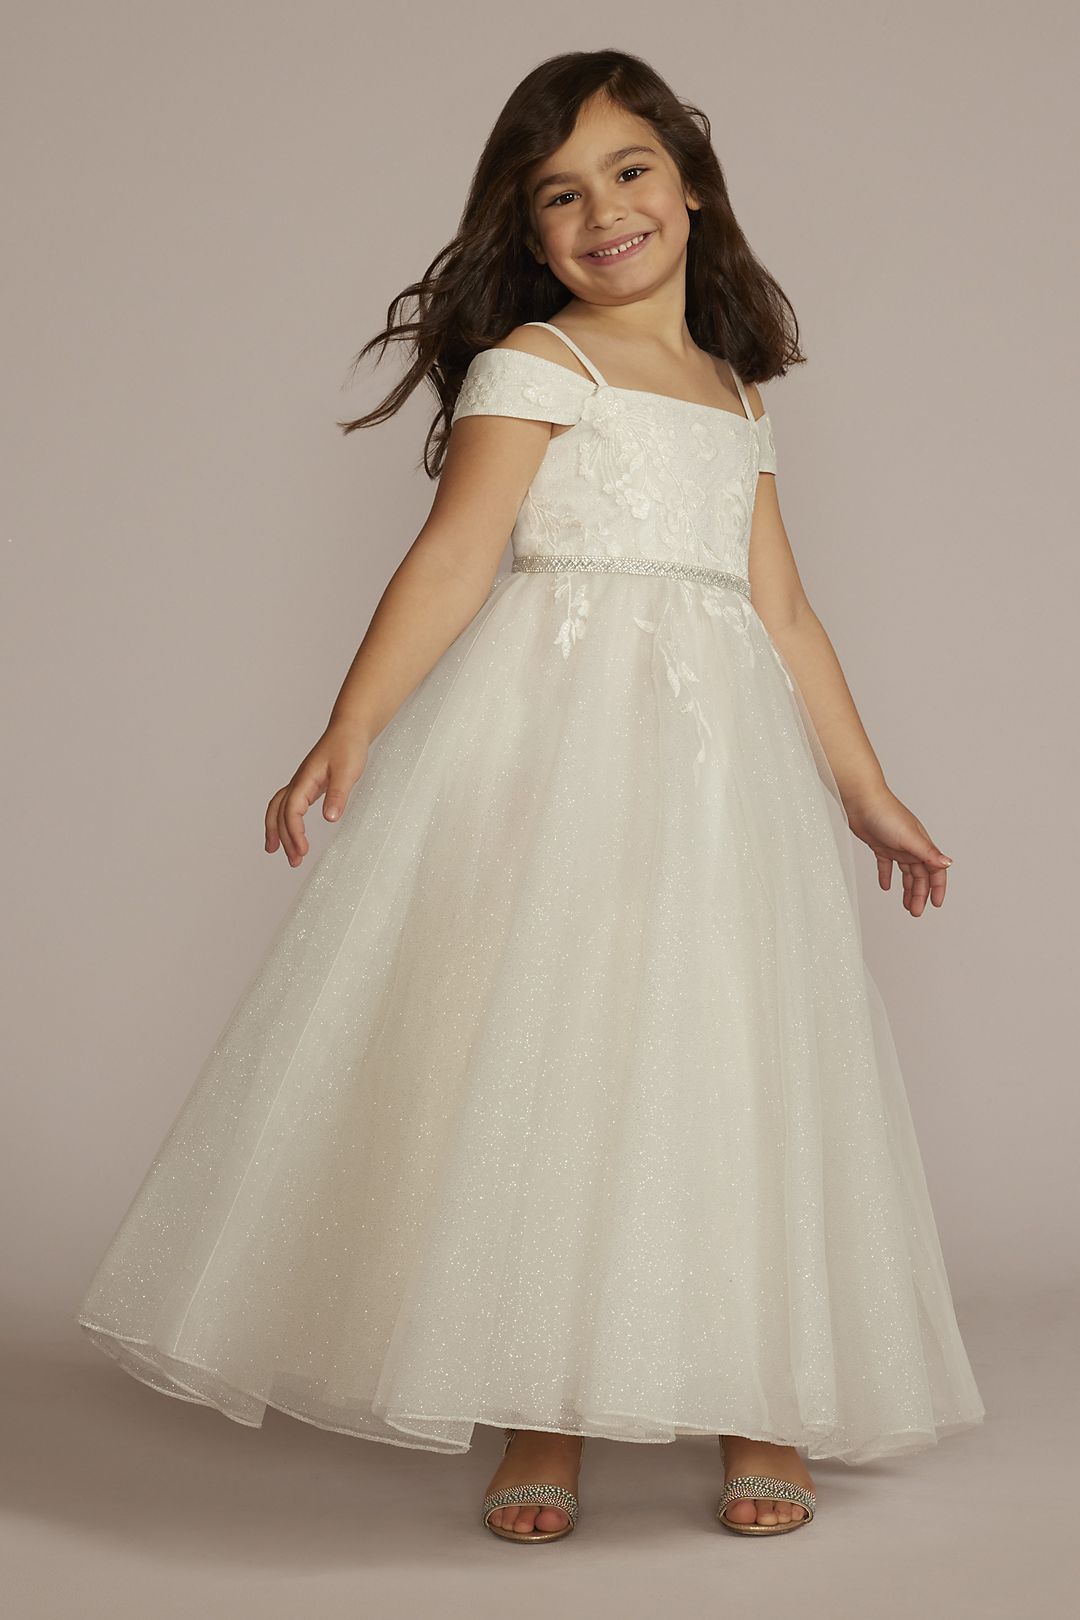 Sparkle Organza Flower Girl Dress with Applique Image 1